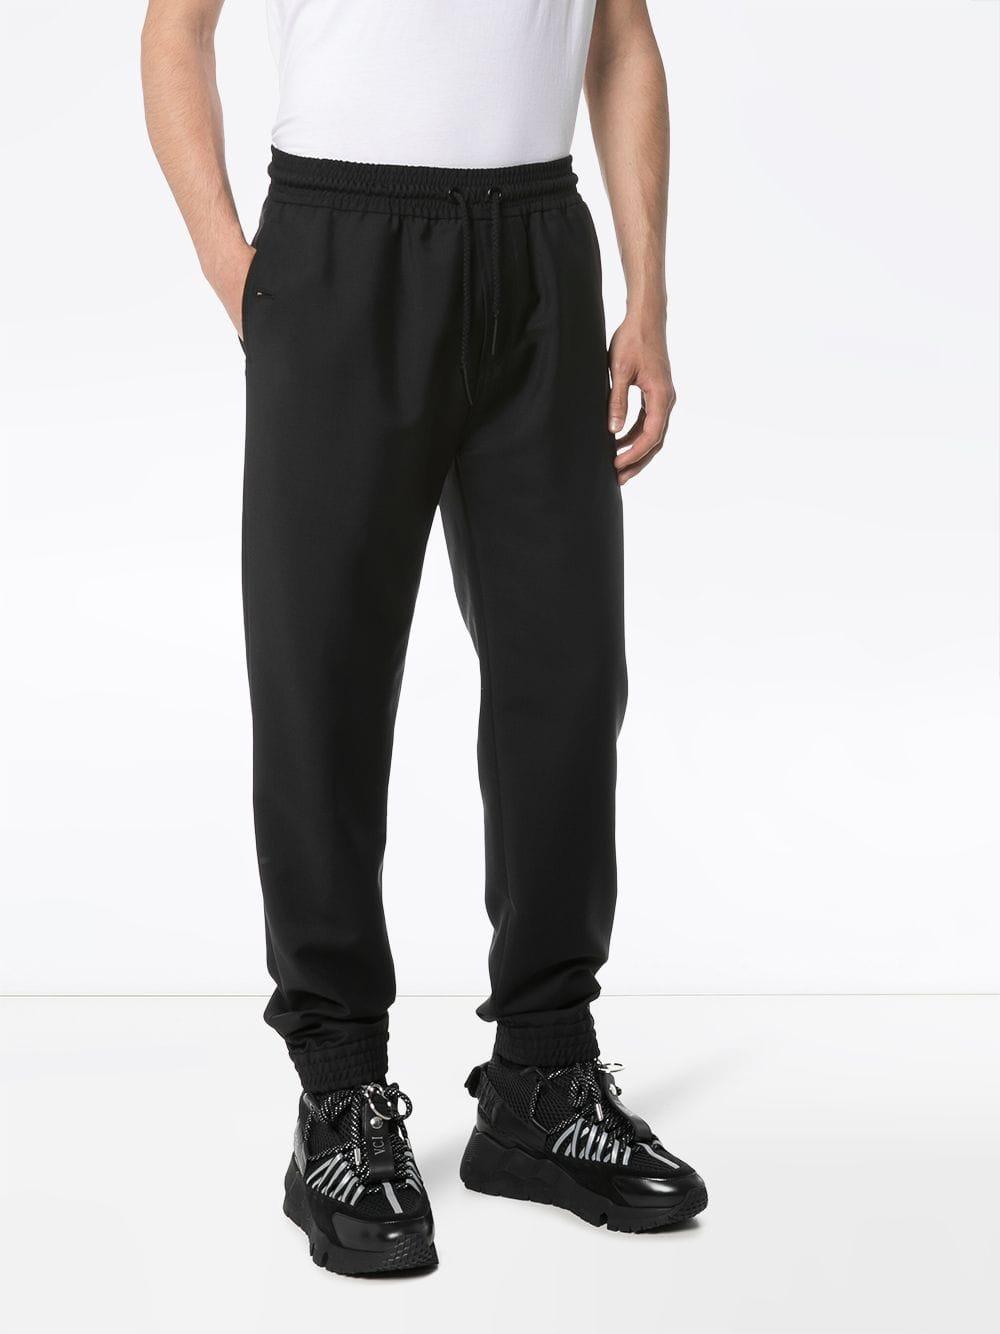 Givenchy Wool Tailored Track Pants in Black for Men - Lyst